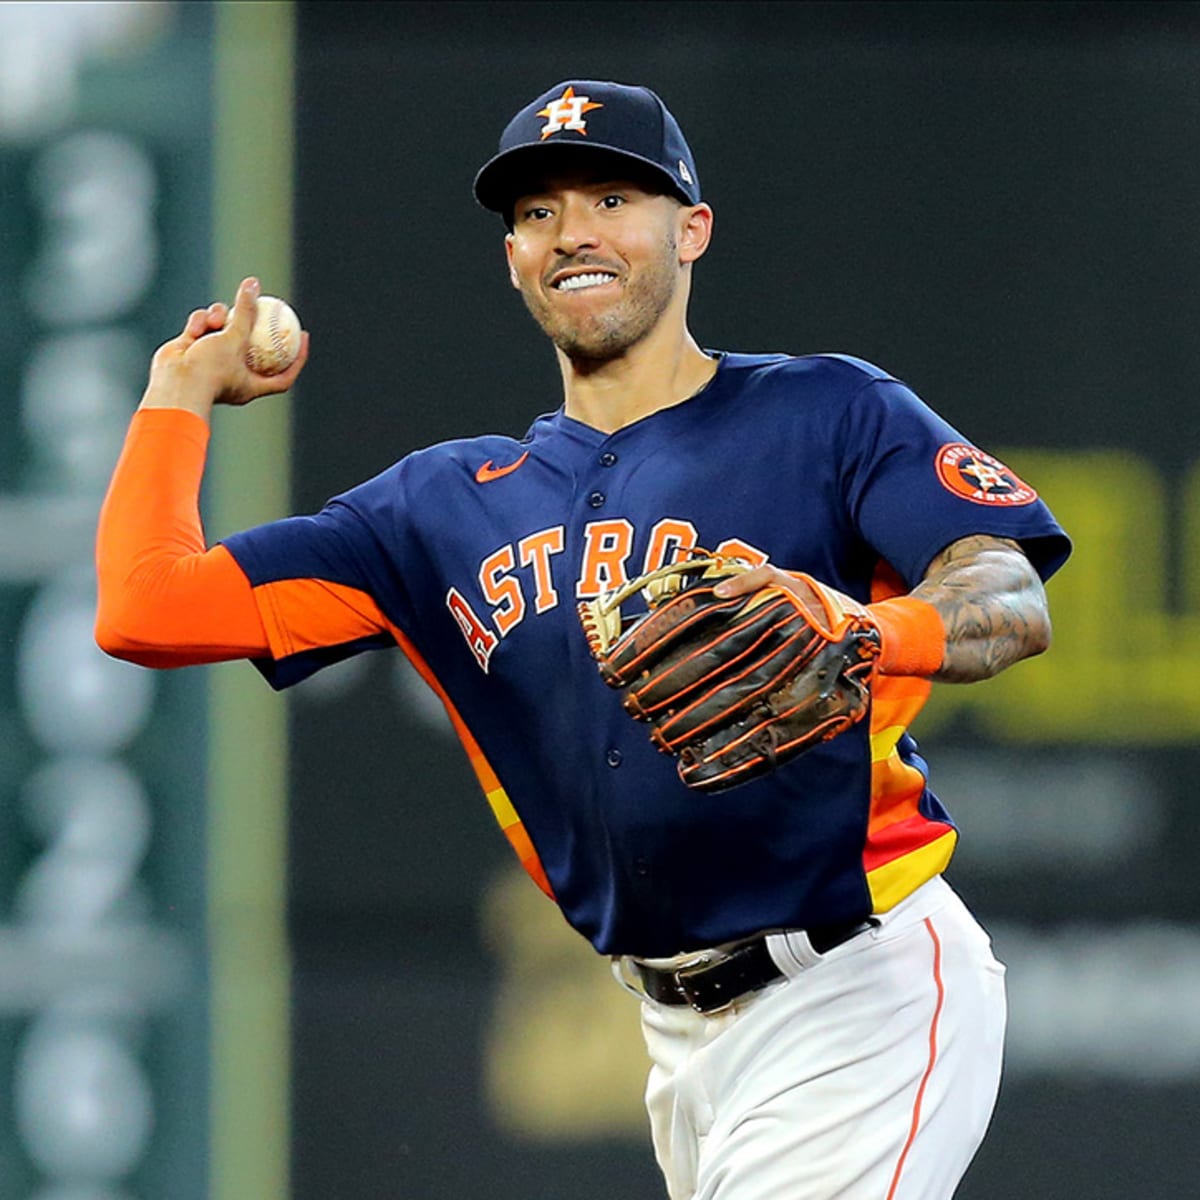 And There He Goes: Carlos Correa Signs with the San Francisco